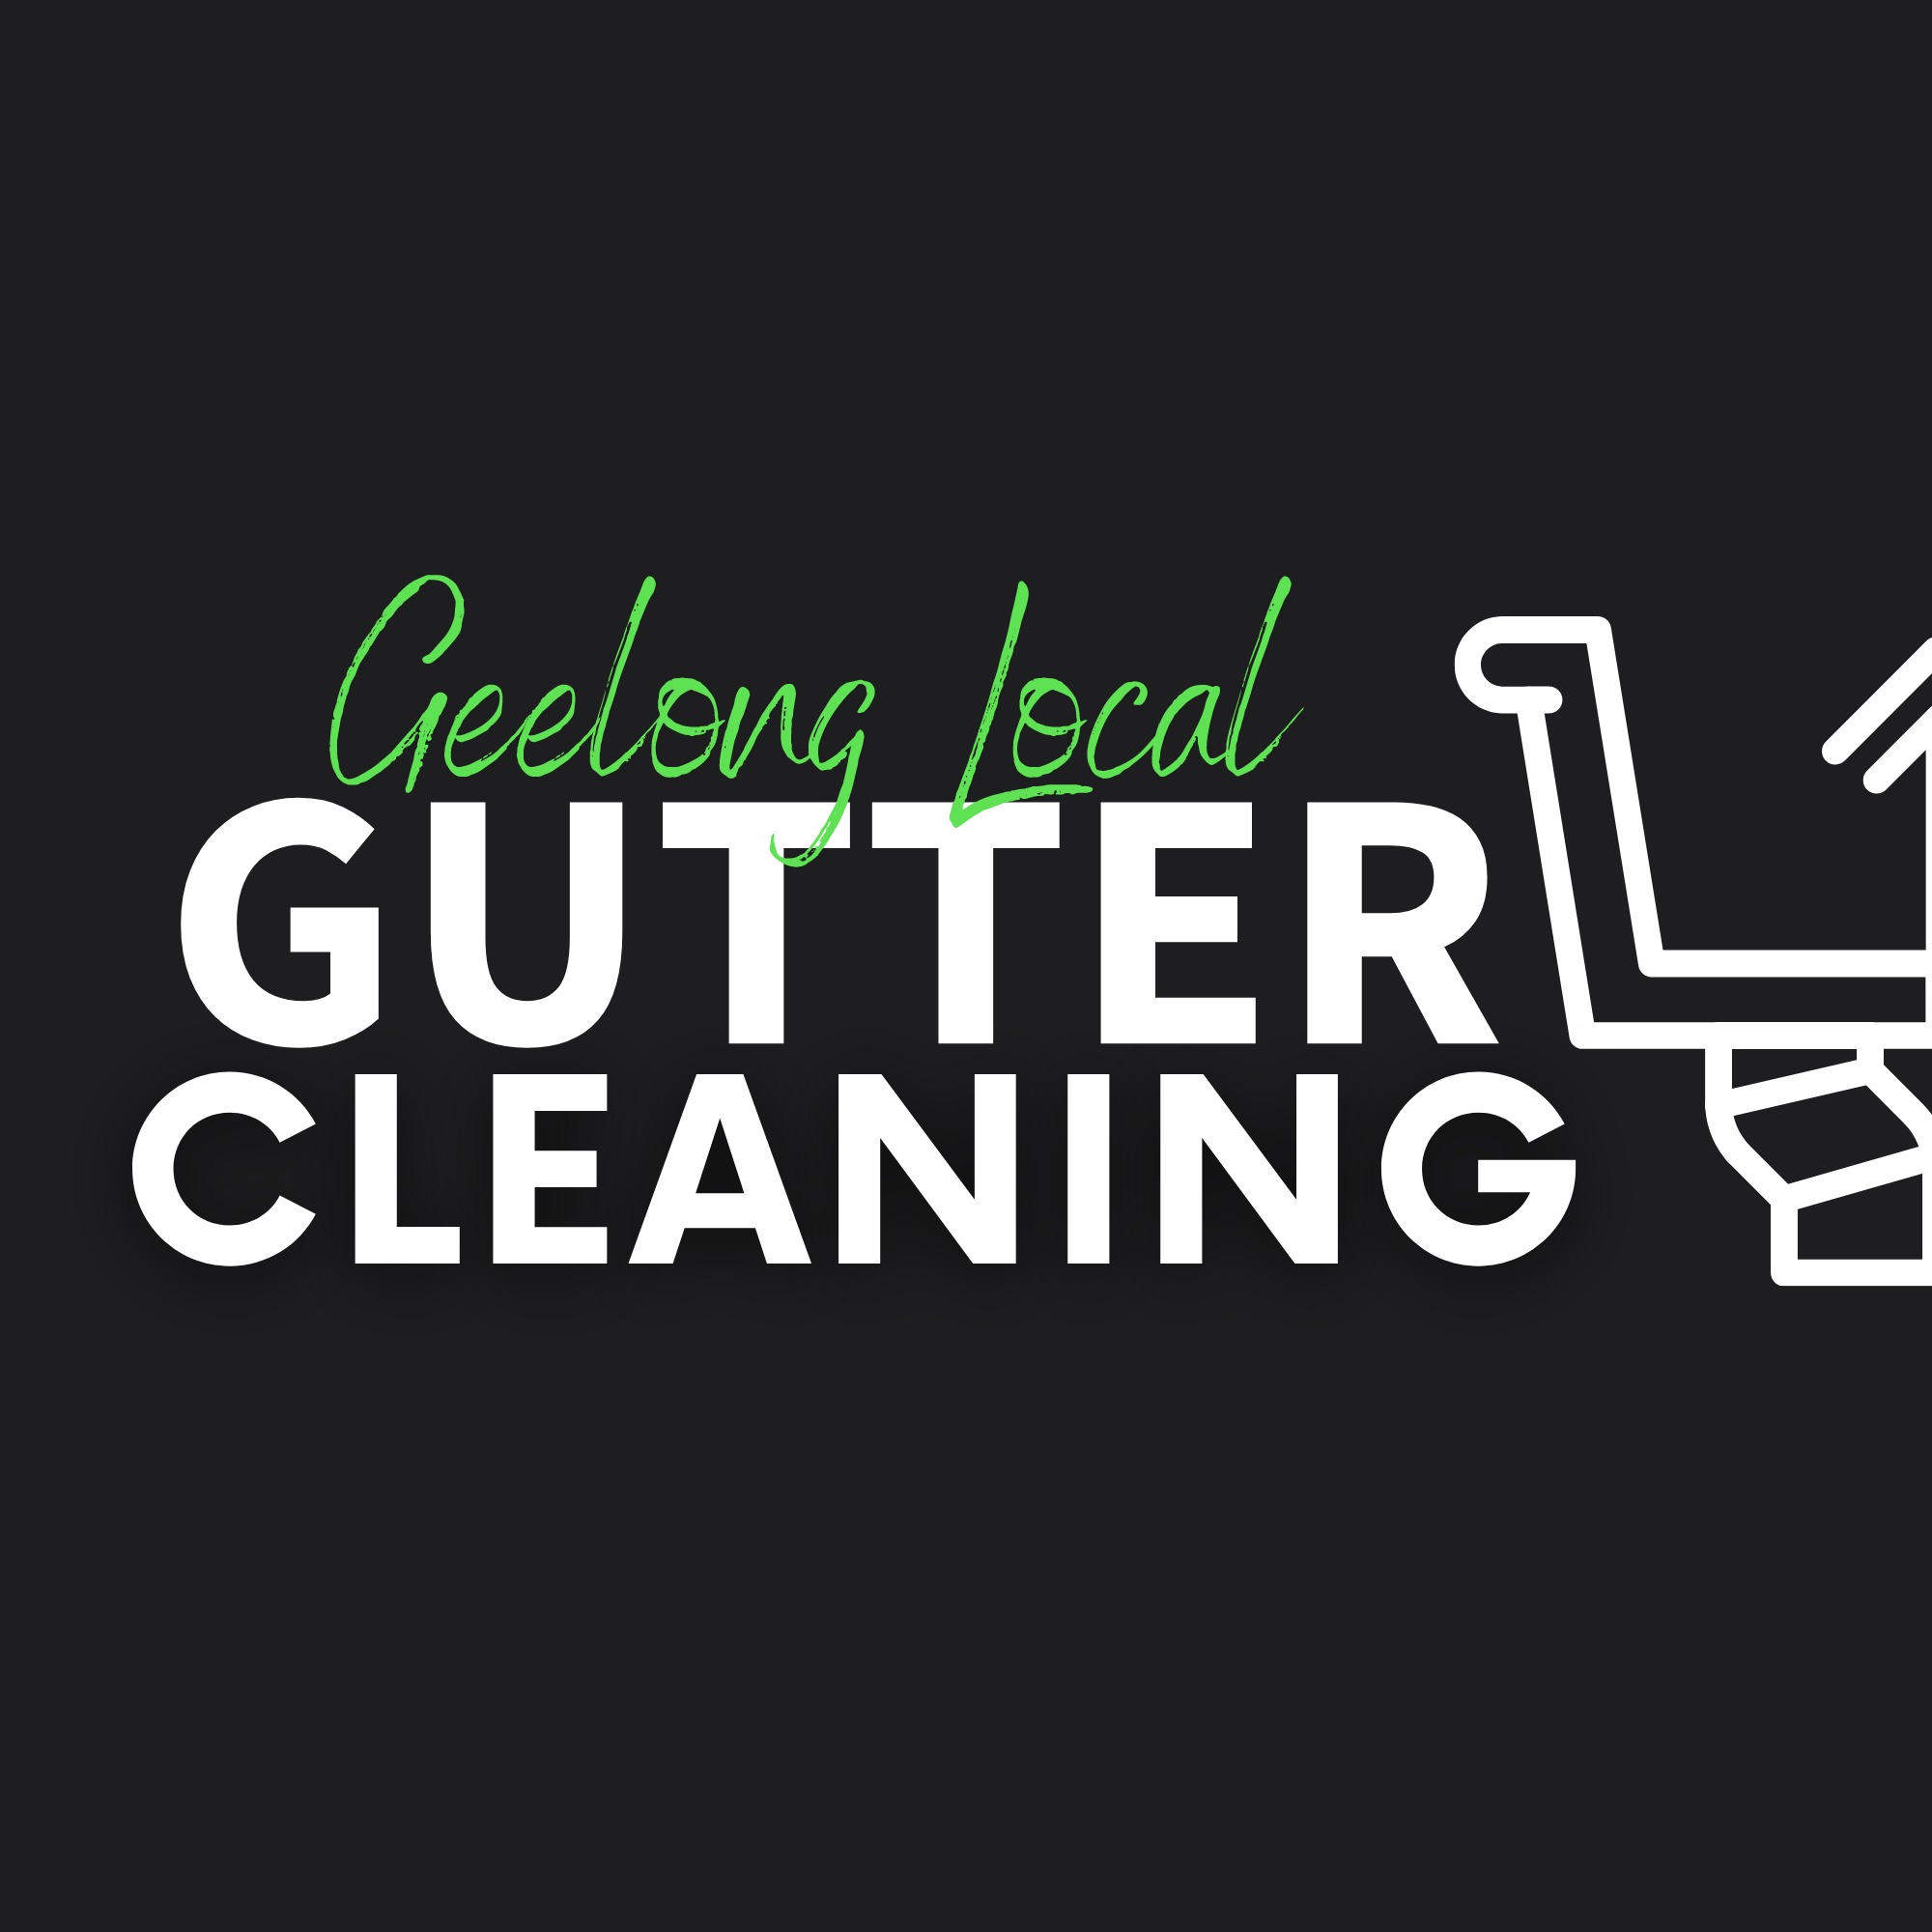 Geelong Local Gutter Cleaning - Geelong, VIC - 0405 981 311 | ShowMeLocal.com